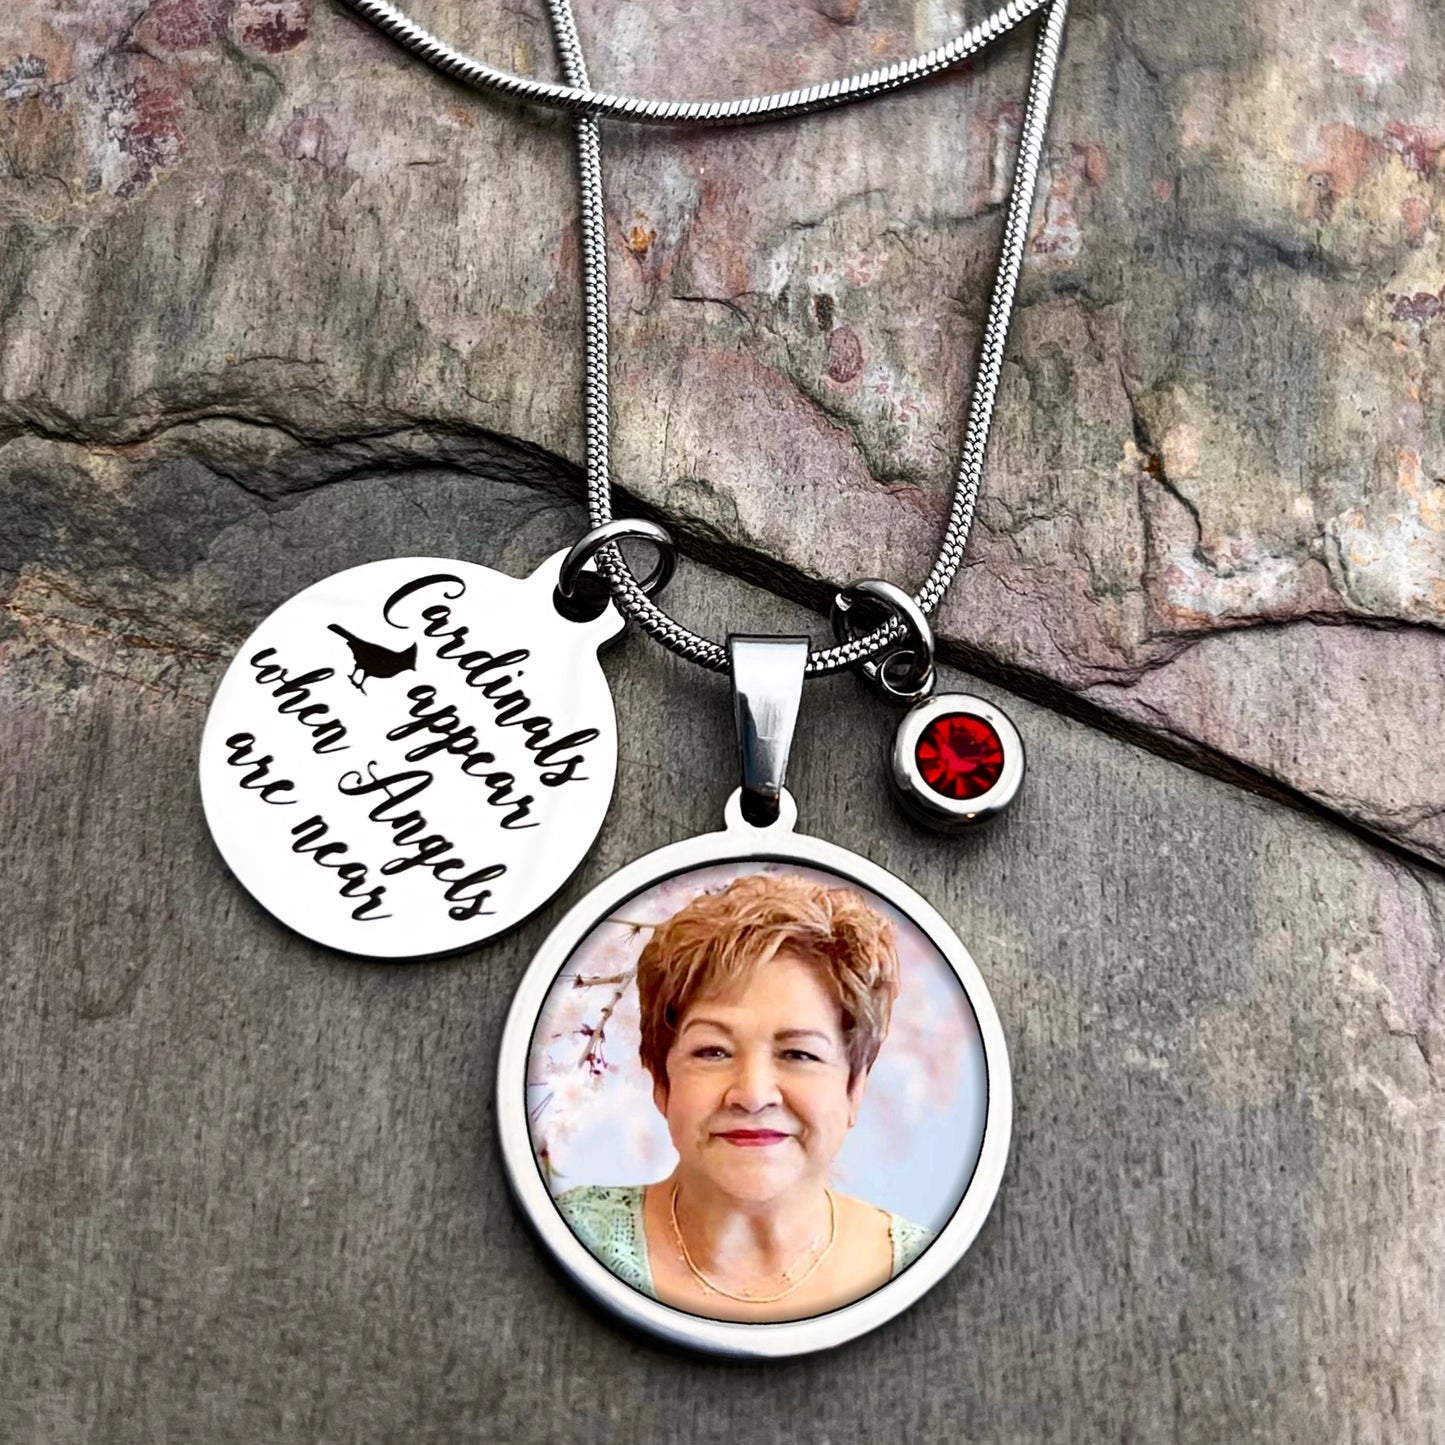 Memorial Cardinal Charm Photo Necklace- Cardinals appear when angels are near